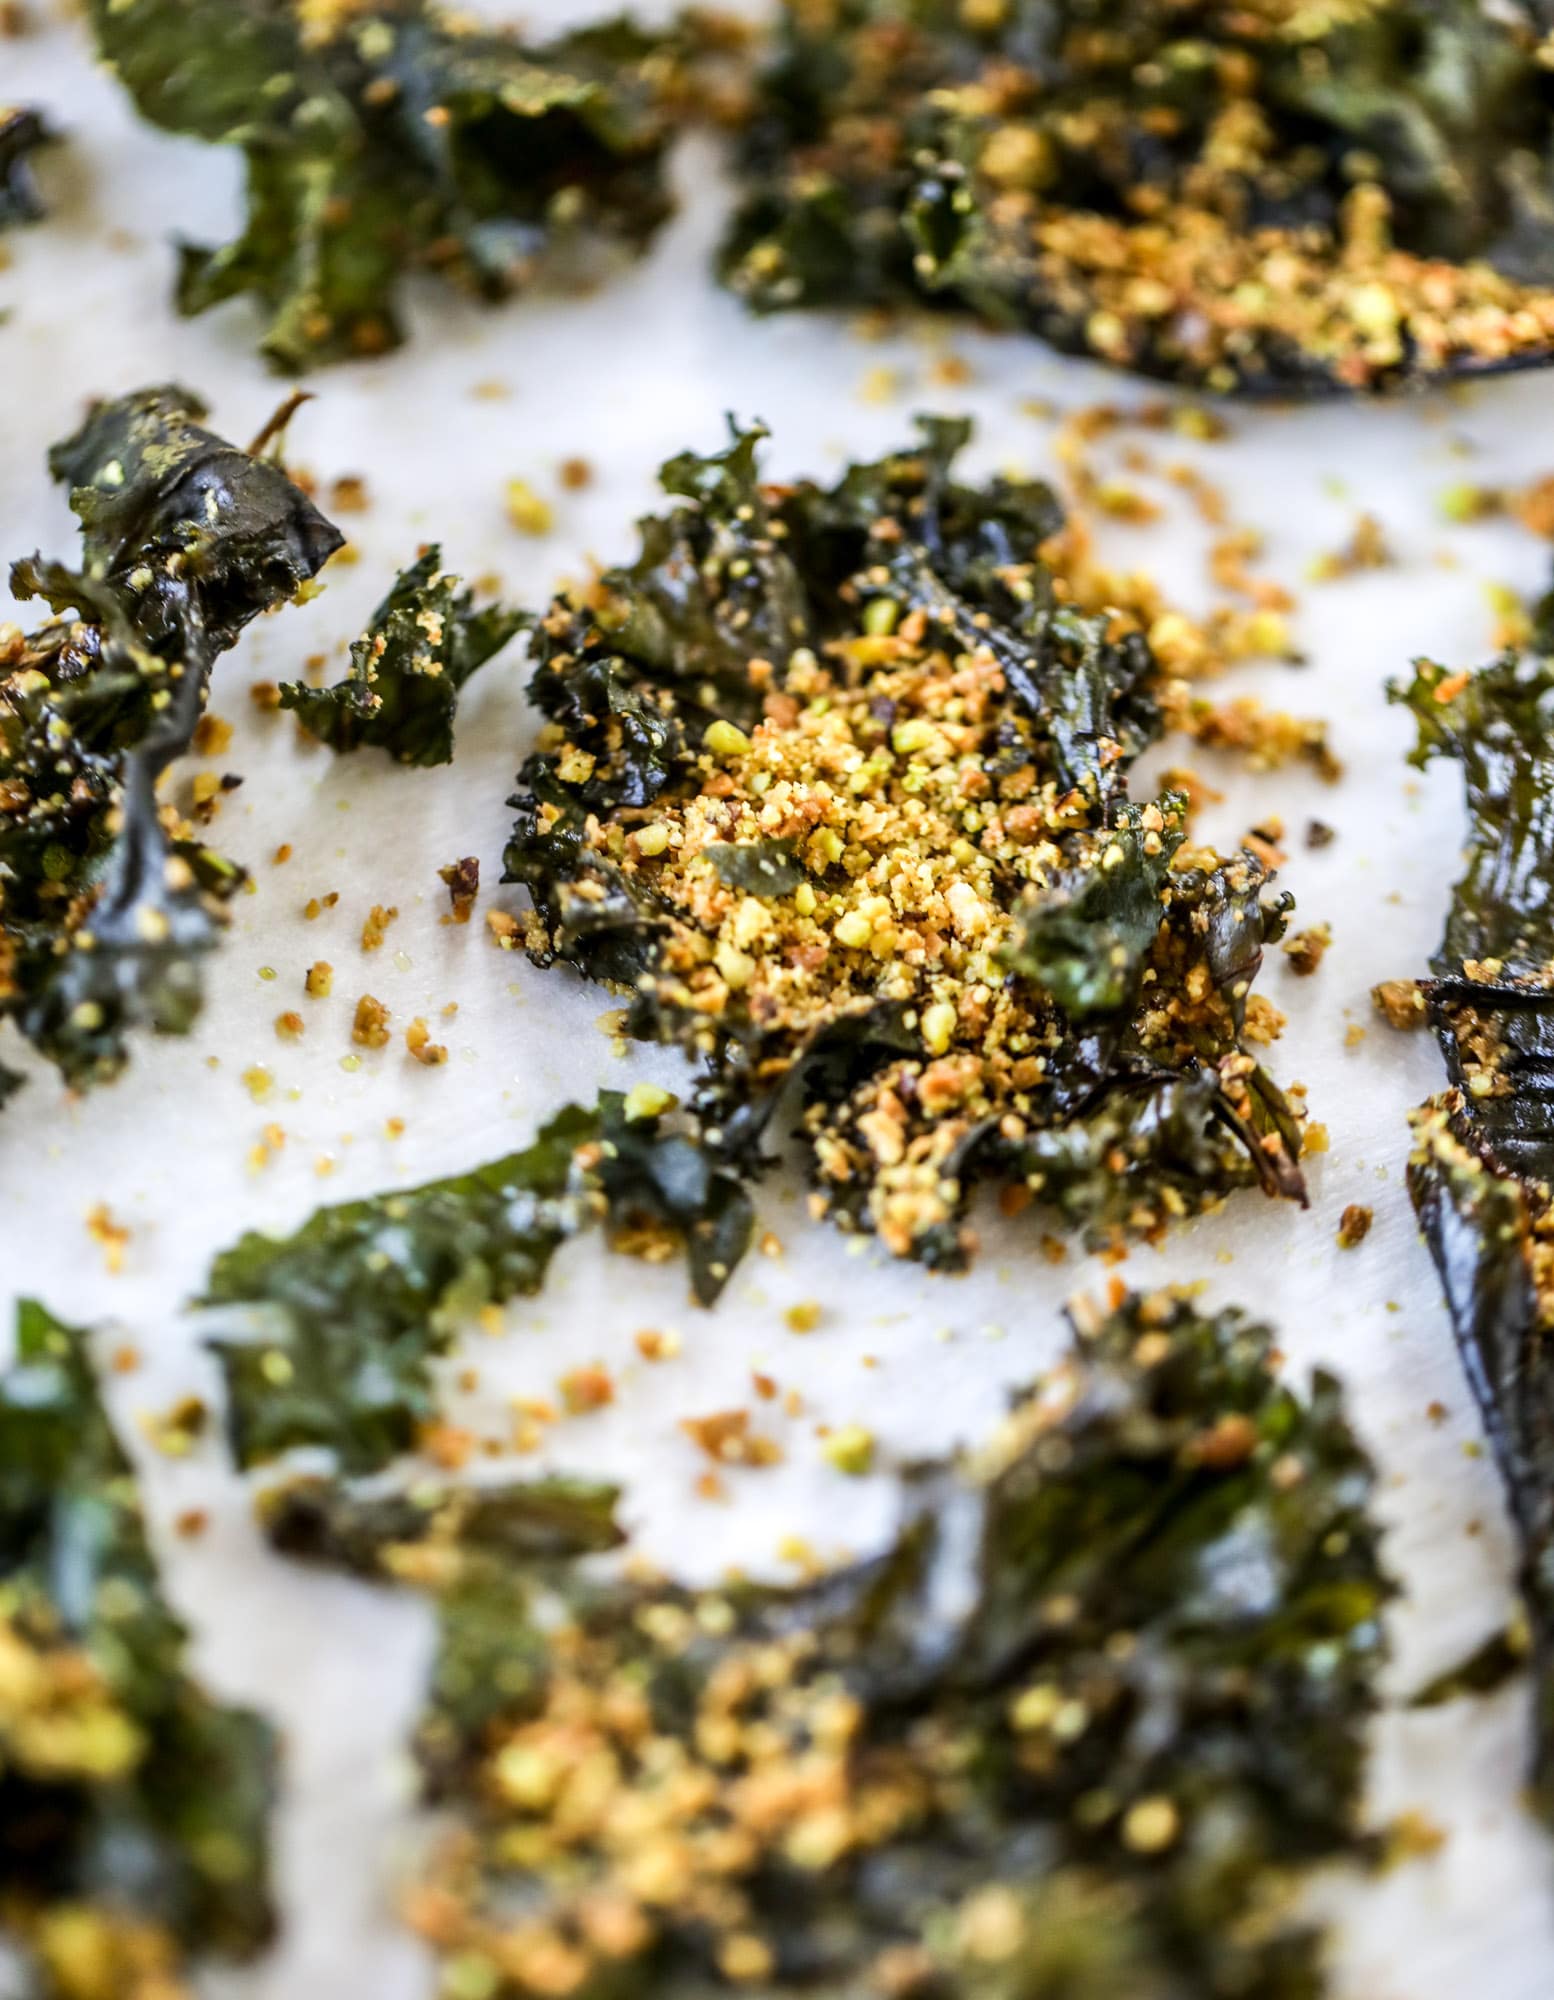 Parmesan pistachio kale chips are an easy and healthy snack - fully of nutty, cheesy flavor and crispy like regular chips! I howsweeteats.com